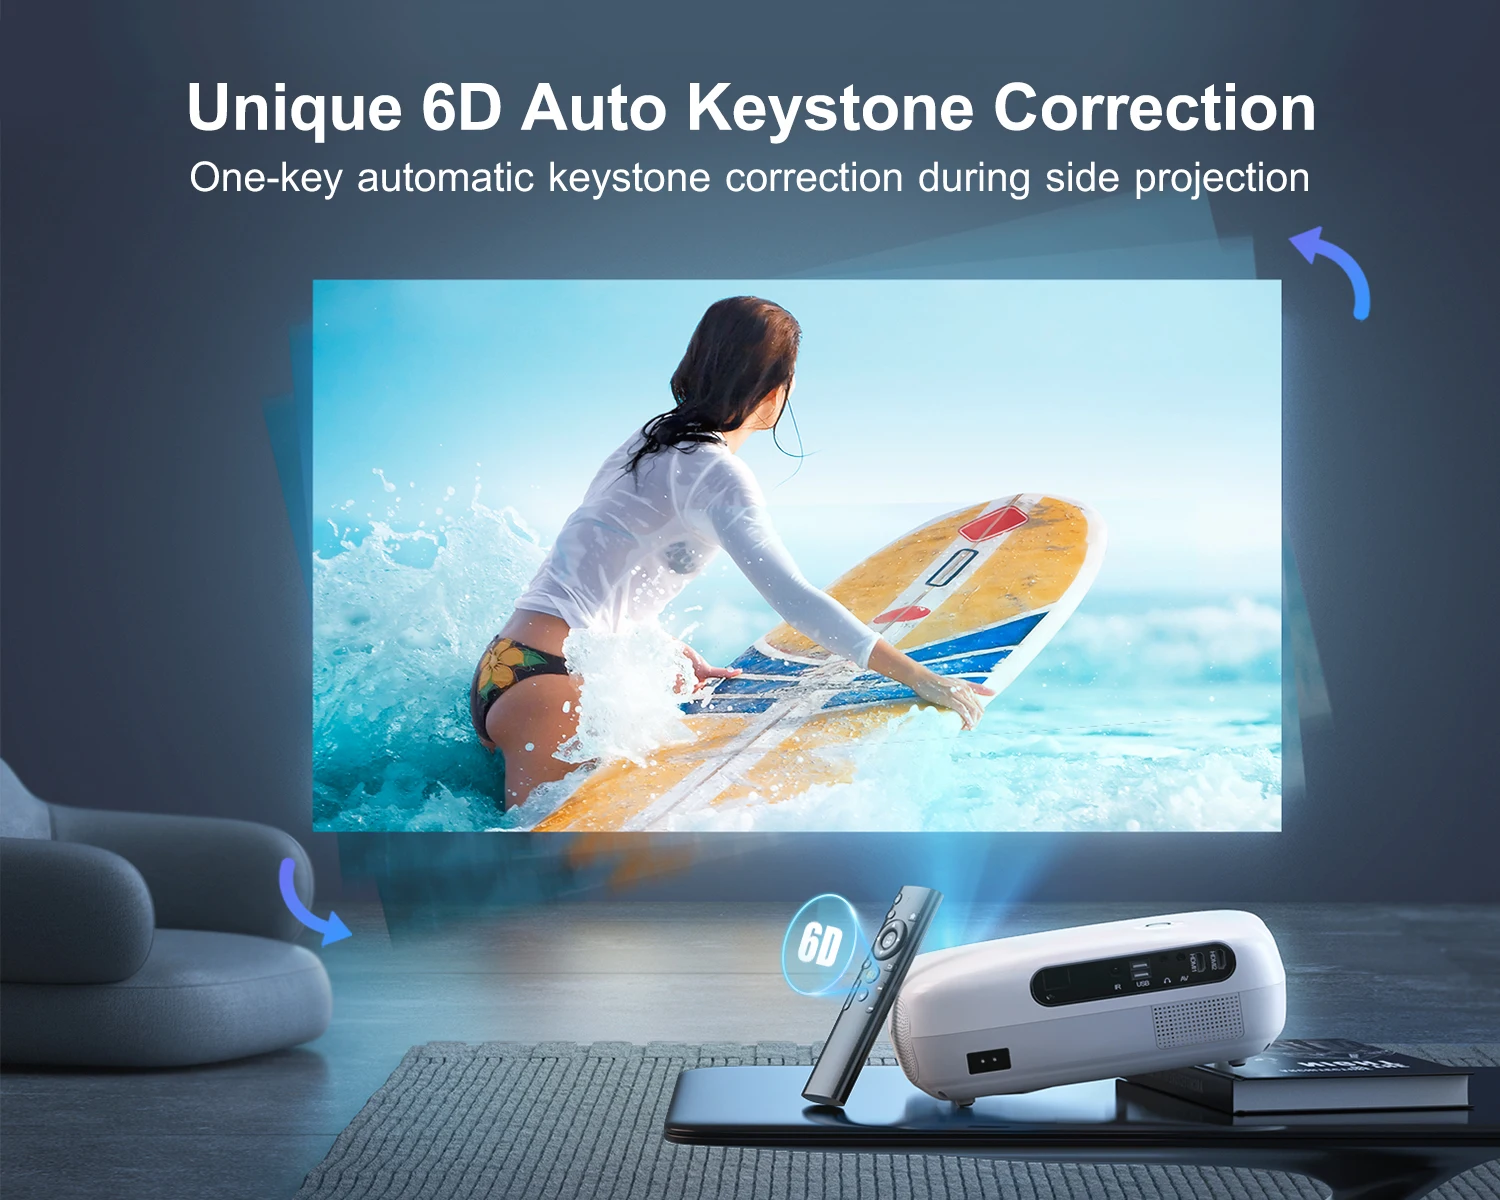 K7 5G WiFi Bluetooth Projector Full HD Native 1080P Support 4K Projectors 500 ANSI 6D Auto Keystone Home&Outdoor Video Projector